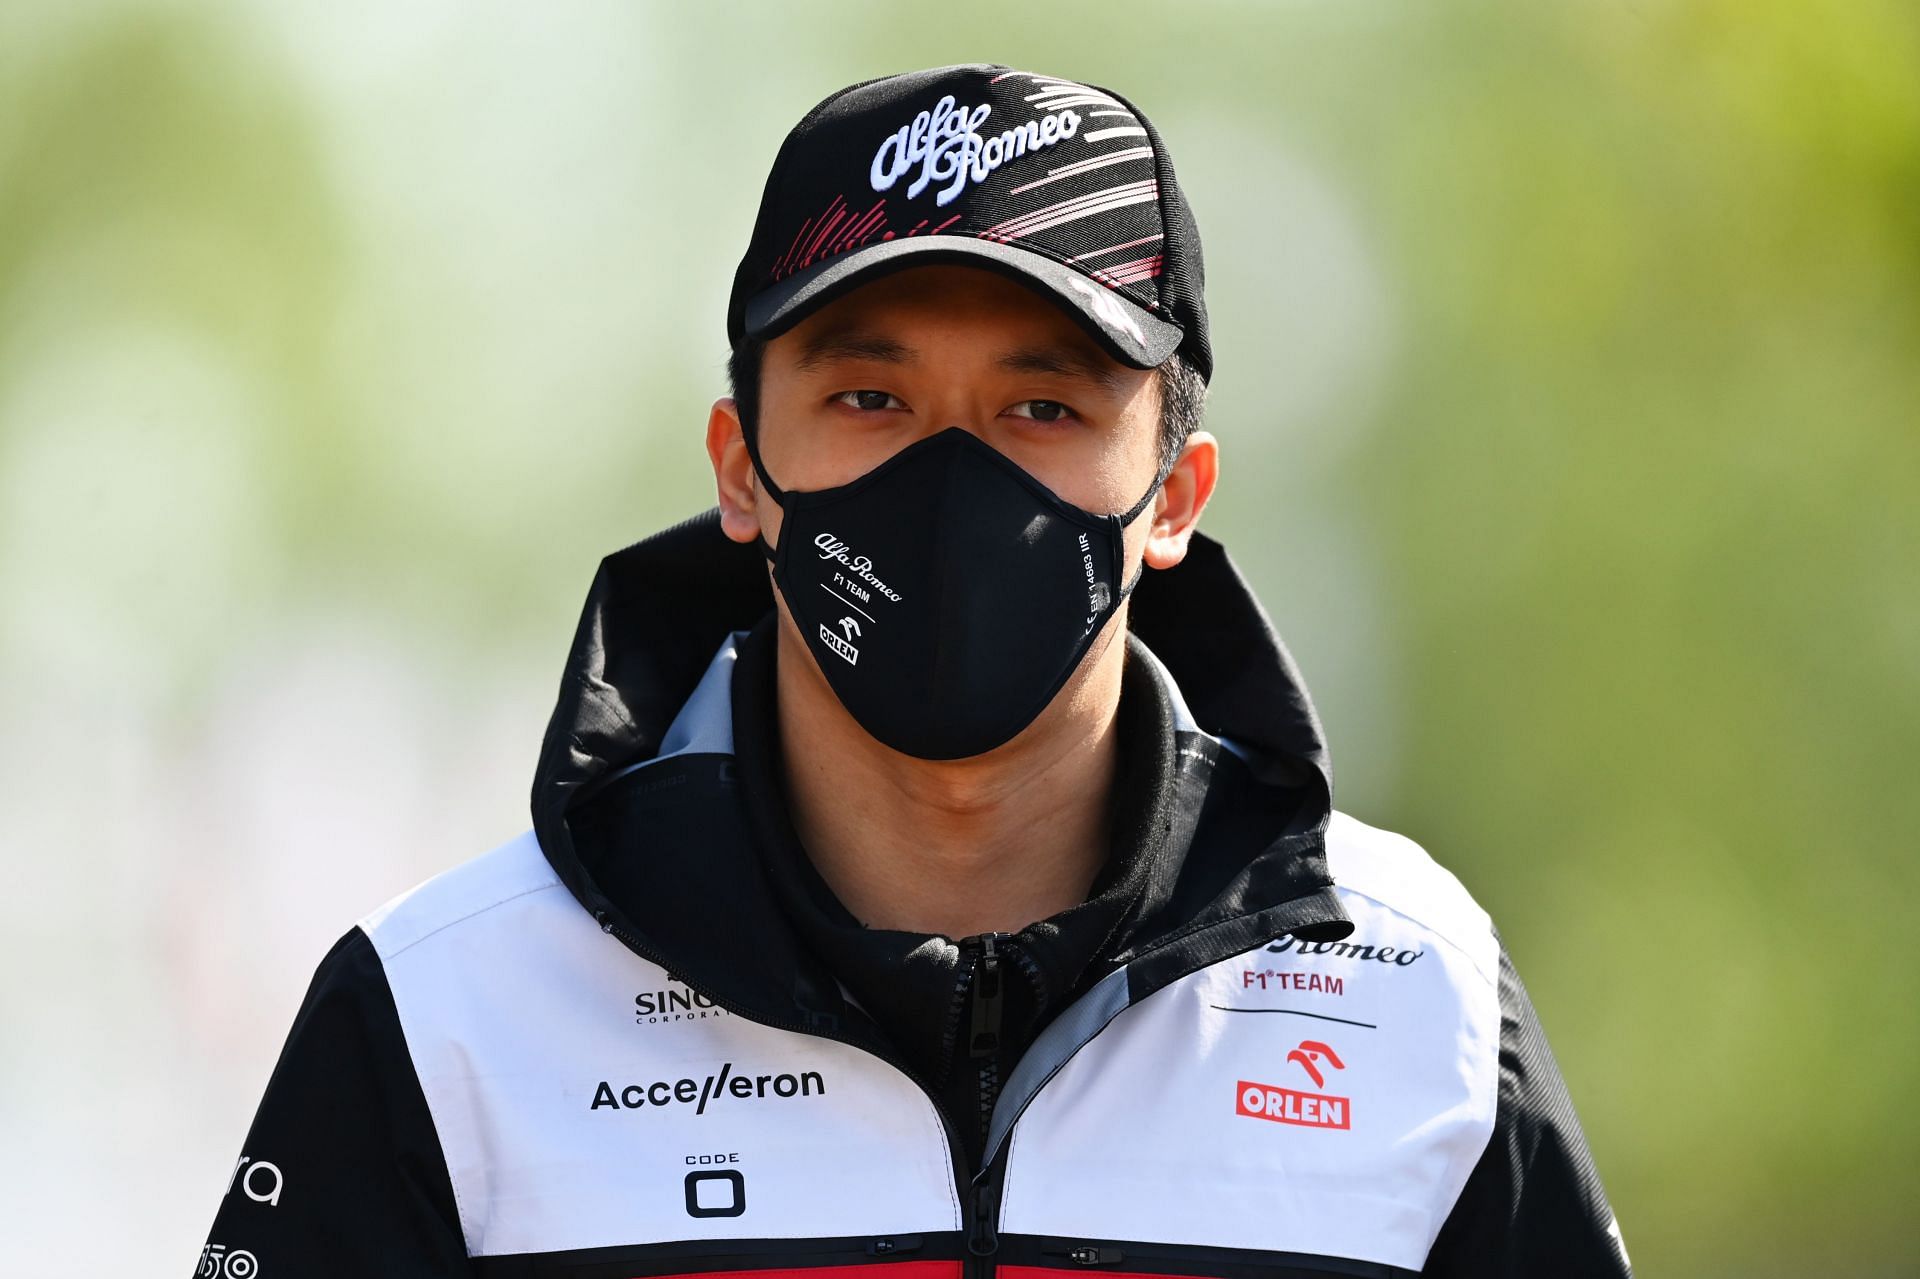 Guanyu Zhou walks in the Paddock prior to practice ahead of the F1 Grand Prix of Emilia Romagna at Autodromo Enzo e Dino Ferrari on April 23, 2022, in Imola, Italy. (Photo by Dan Mullan/Getty Images)